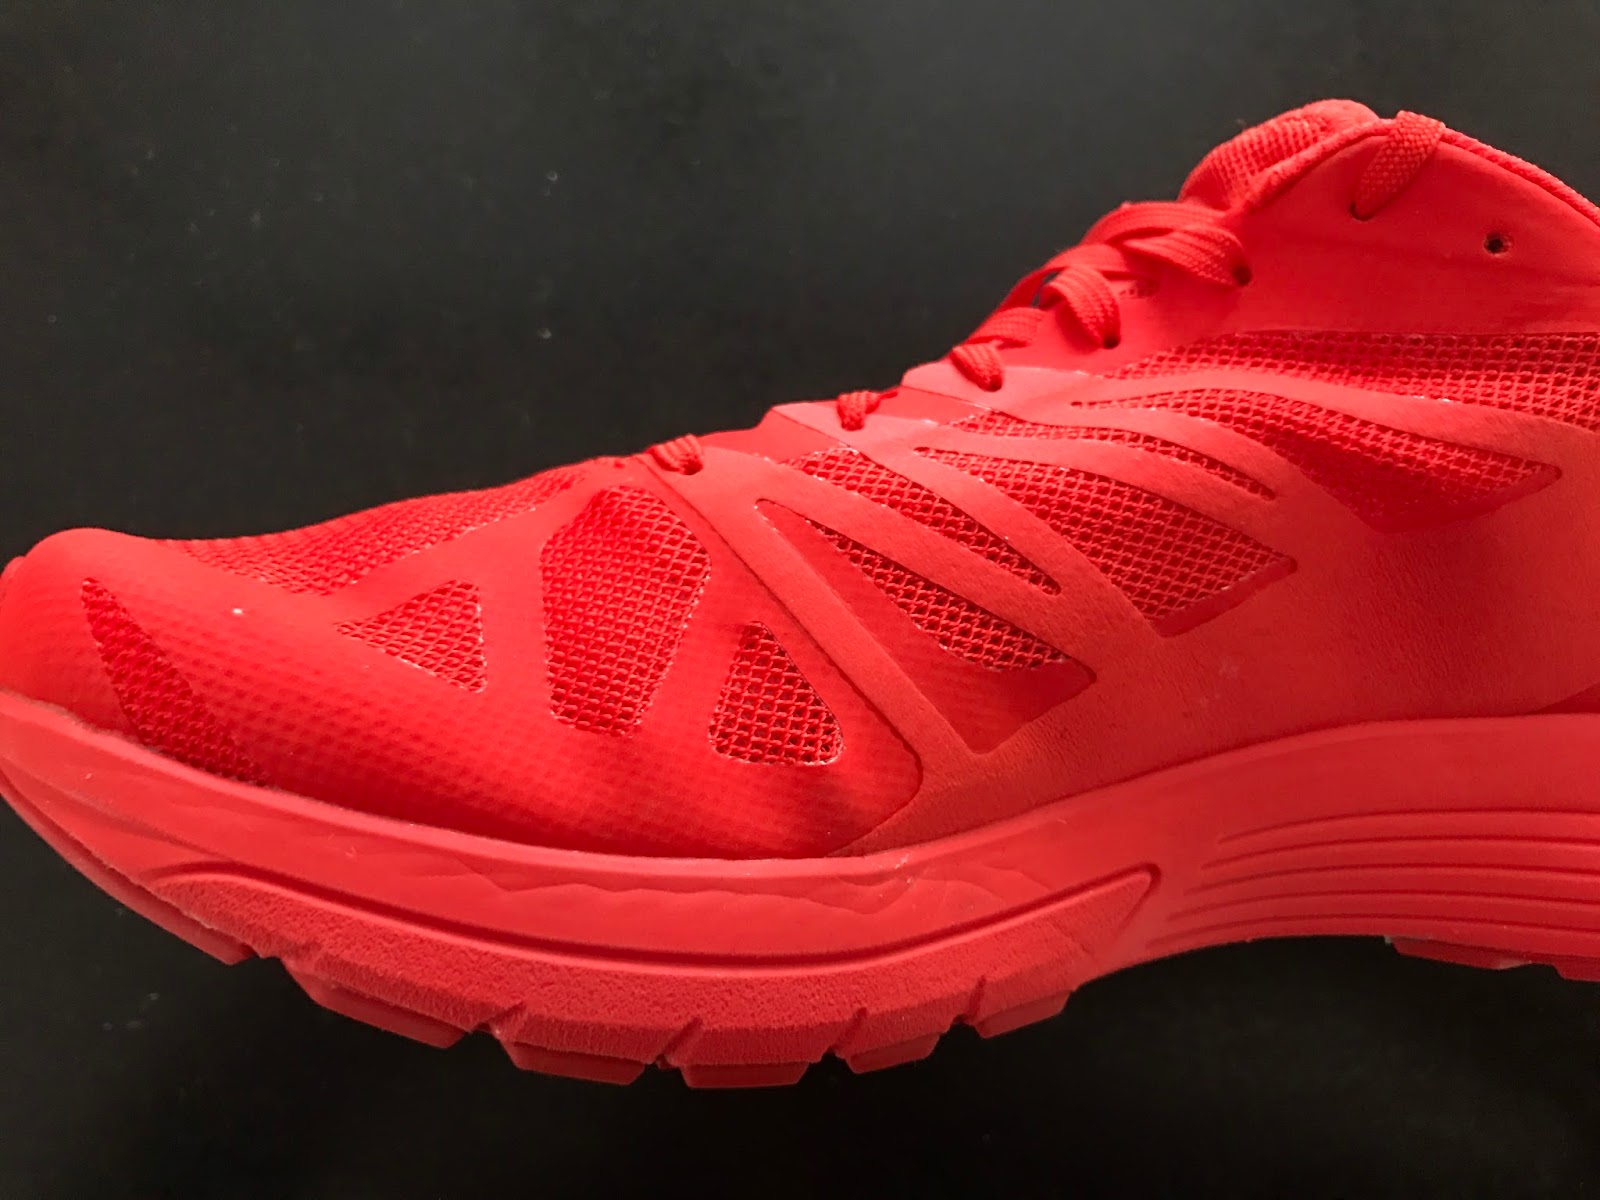 Road Trail Run: Review Salomon S/Lab Responsive Racer with Vibration Attenuation.